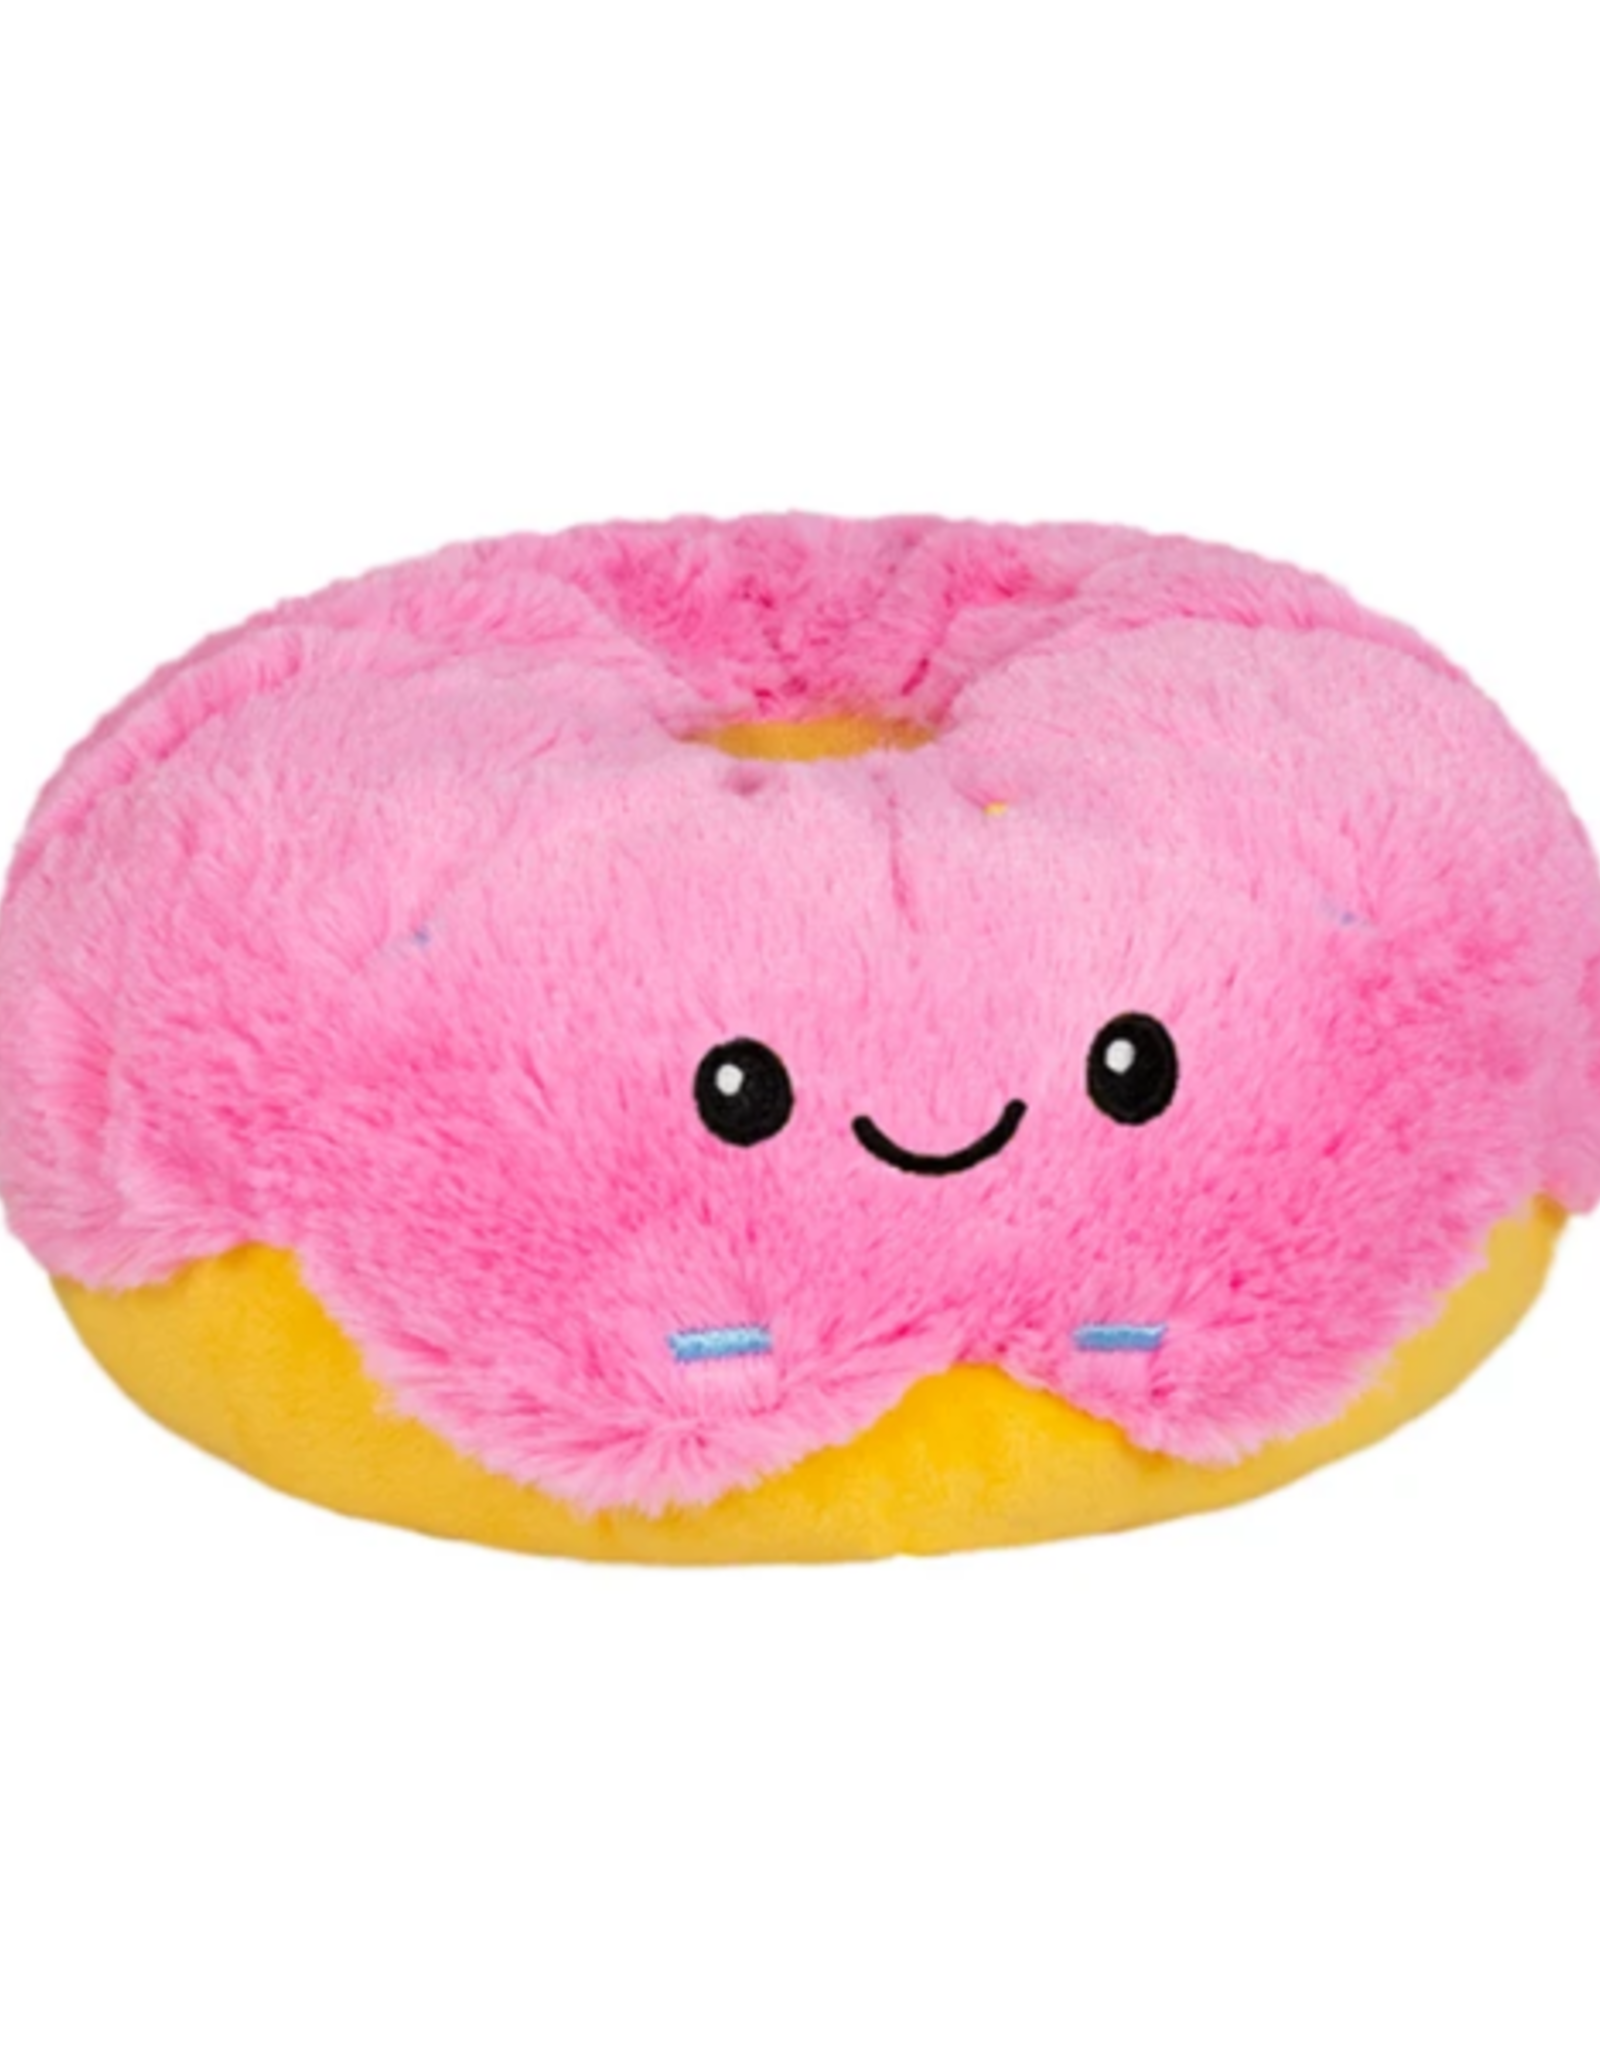 Squishable Snugglemi Snackers Pink Donut 5"